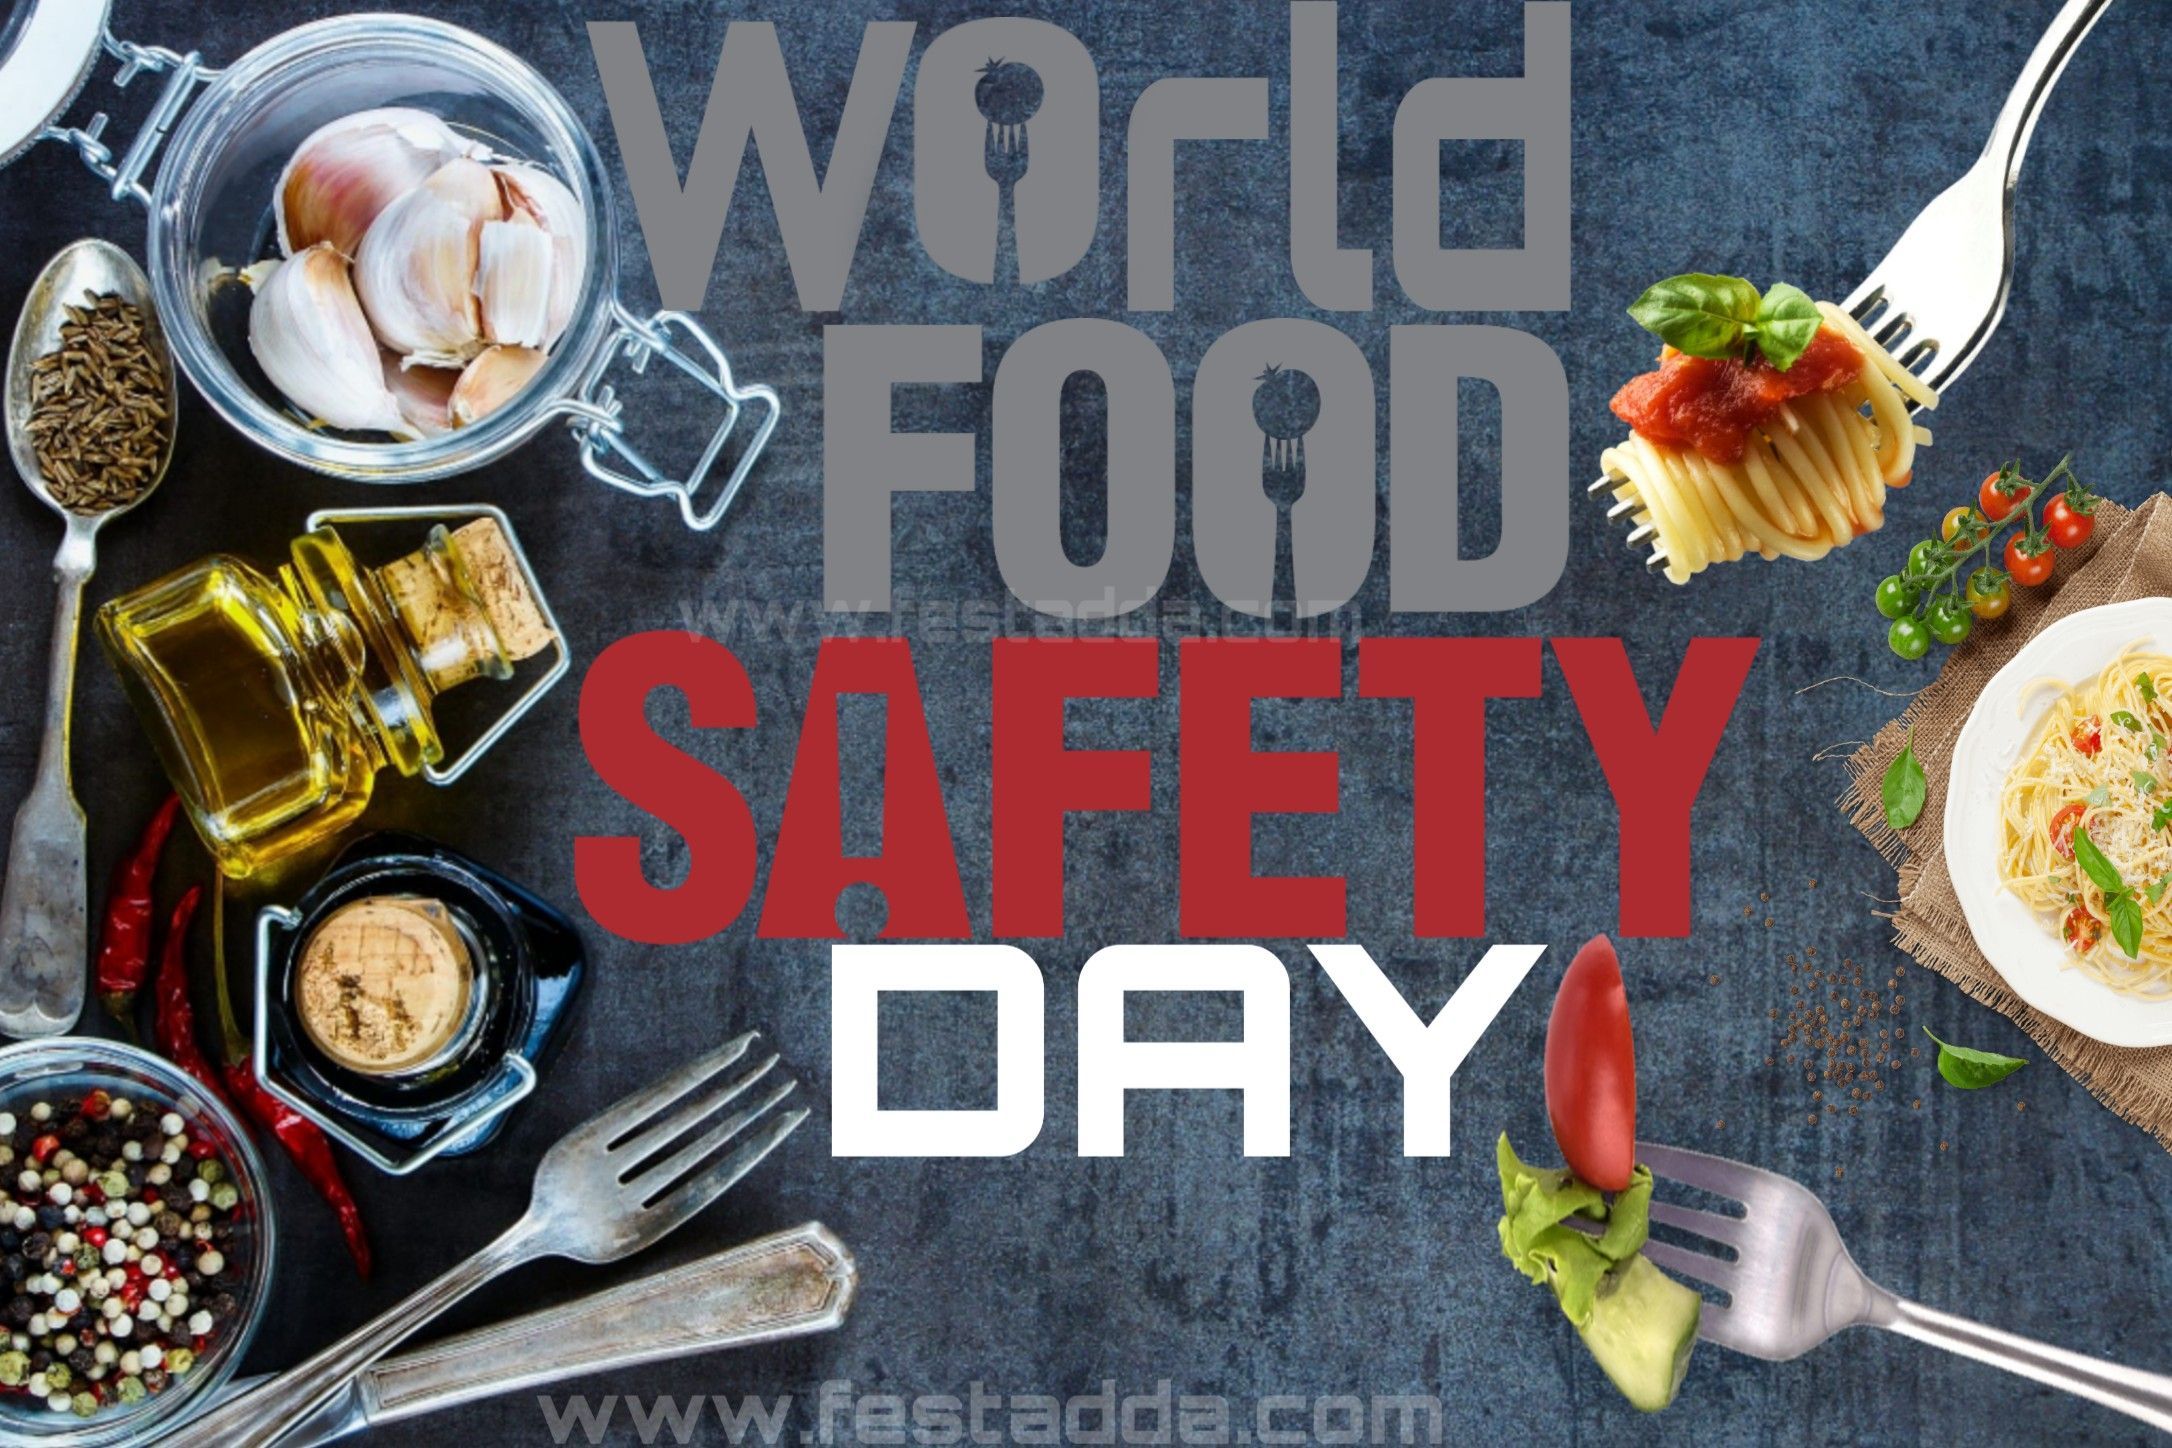 World Safety Day Quotes 2019. Food safety, Food, Good food